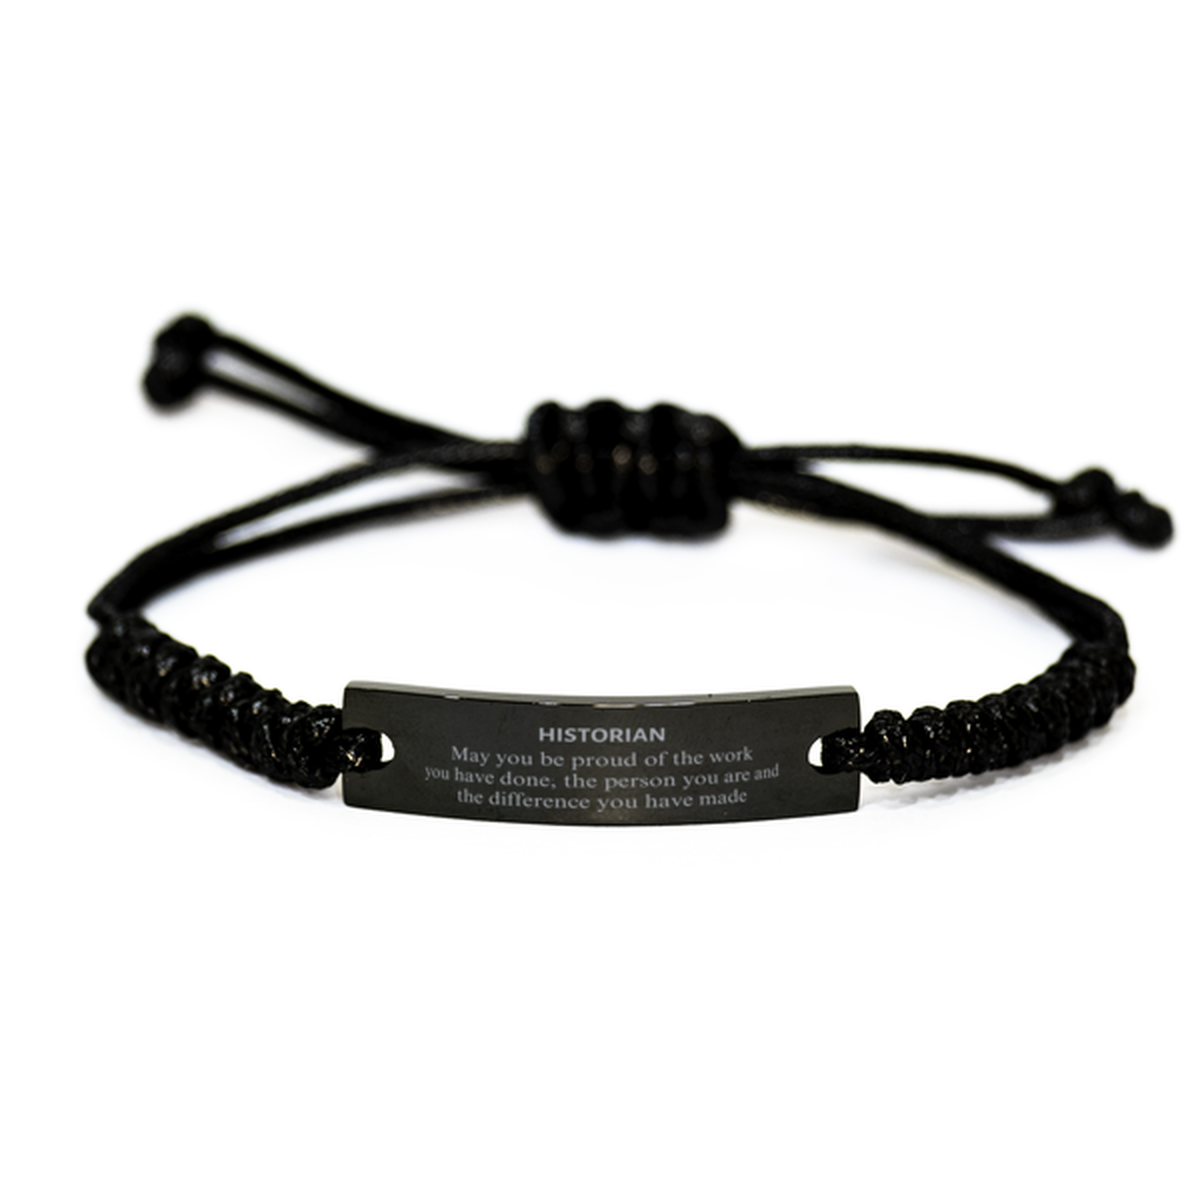 Historian May you be proud of the work you have done, Retirement Historian Black Rope Bracelet for Colleague Appreciation Gifts Amazing for Historian